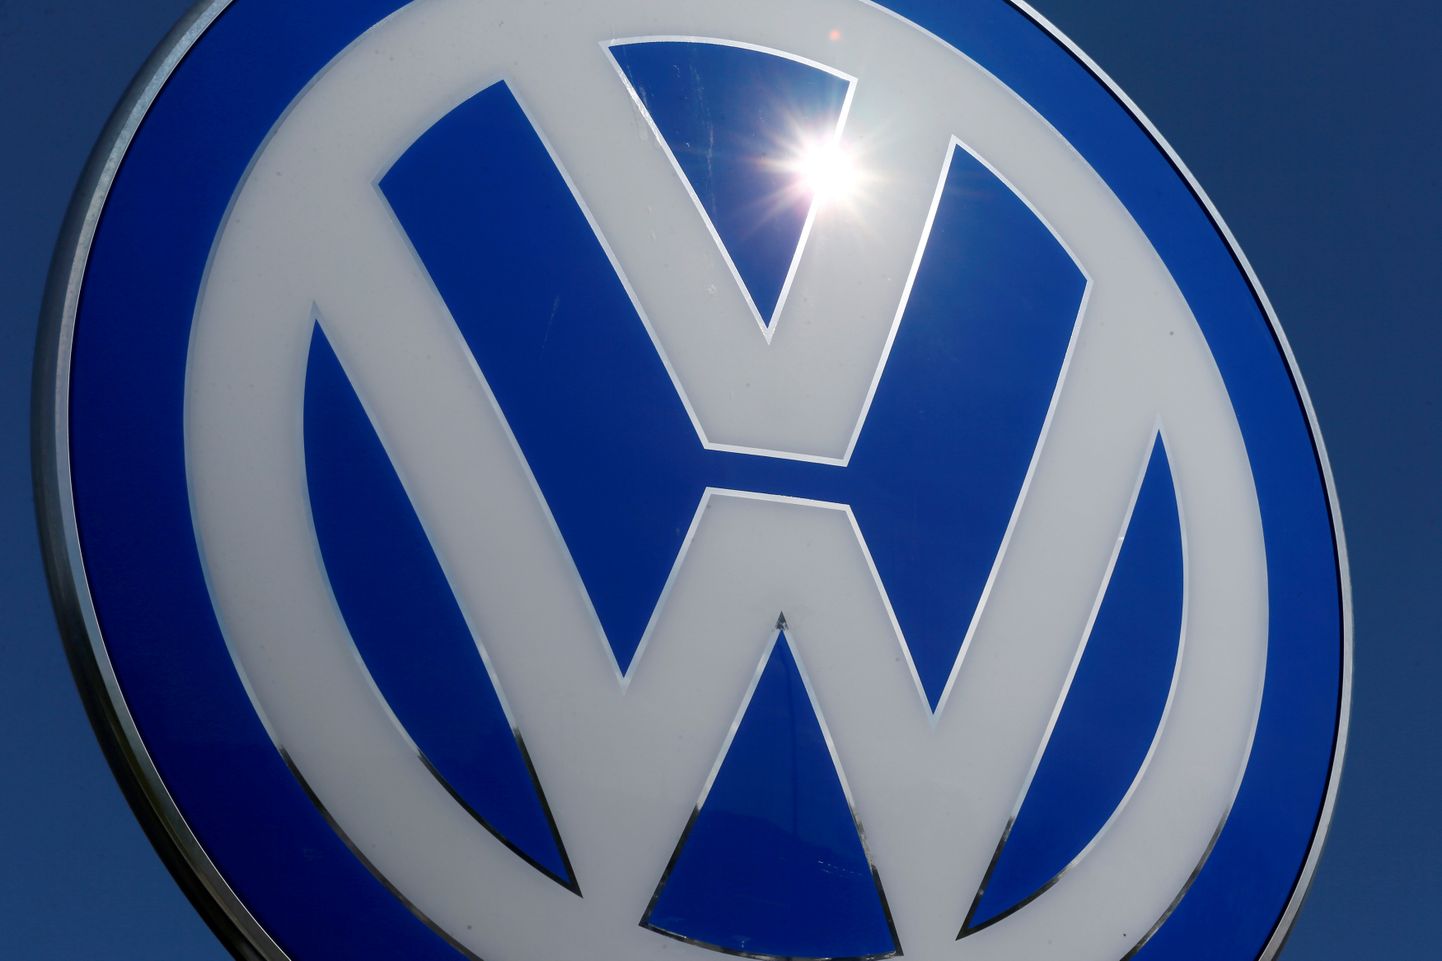 FILE PHOTO: A Volkswagen logo is pictured at Volkswagen's headquarters in Wolfsburg, Germany, April 22, 2016. REUTERS/Hannibal Hanschke/File Photo